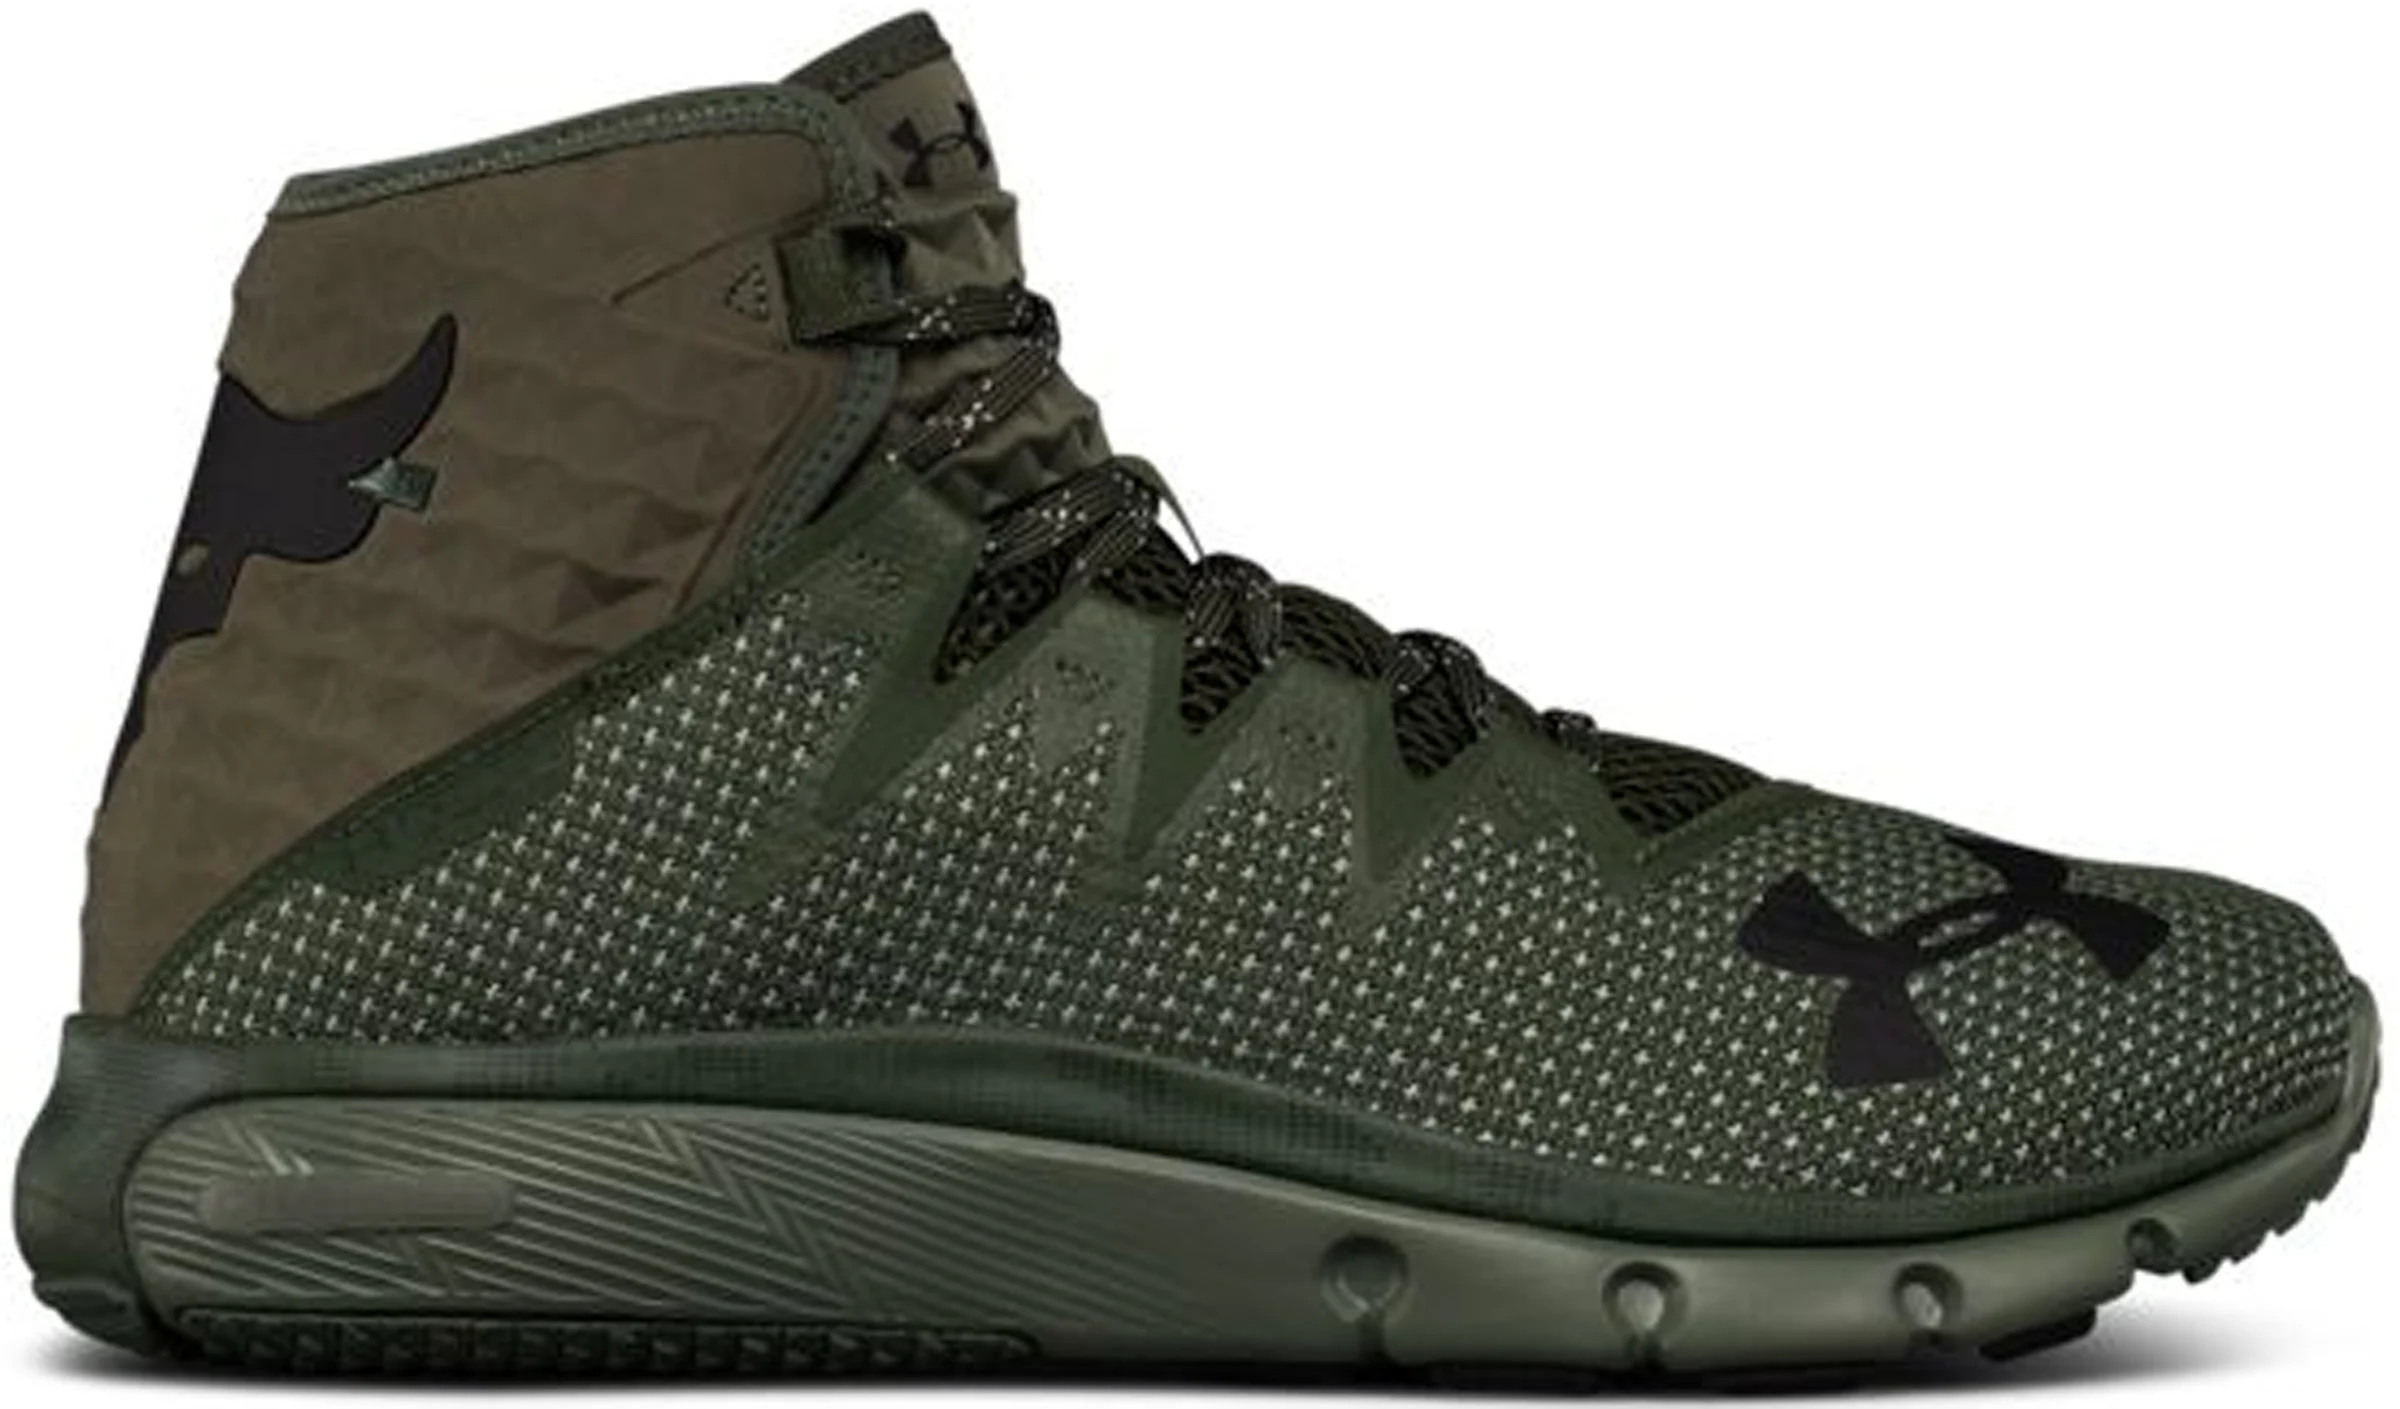 Under Armour The Rock Delta Downtown Green Men's - 3020175-300 - US